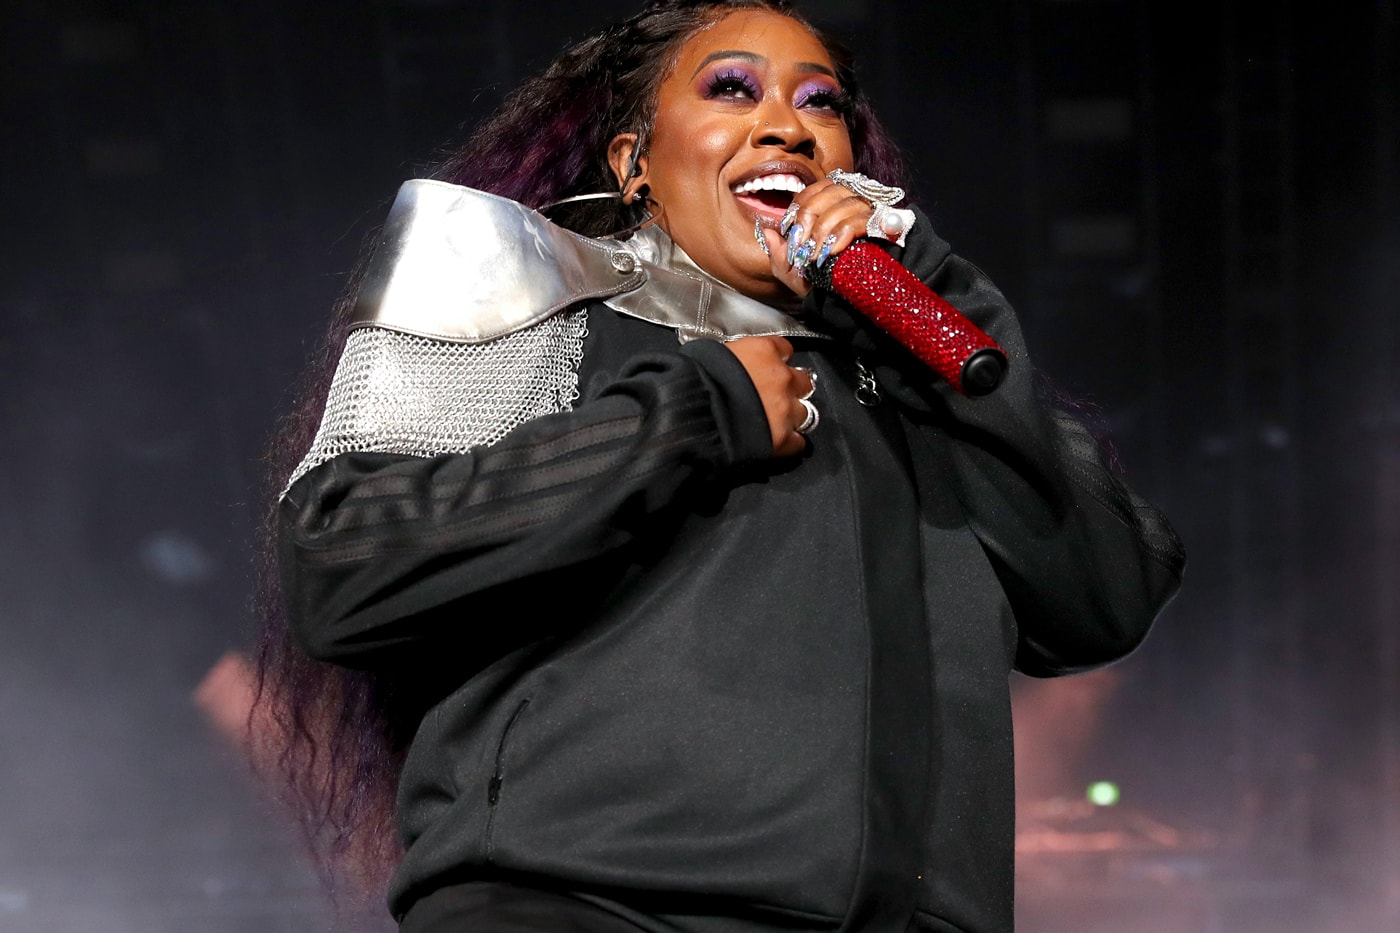 Missy Elliott Wants You to Get in the Sporting Spirit With Her New Single "Pep Rally" Song